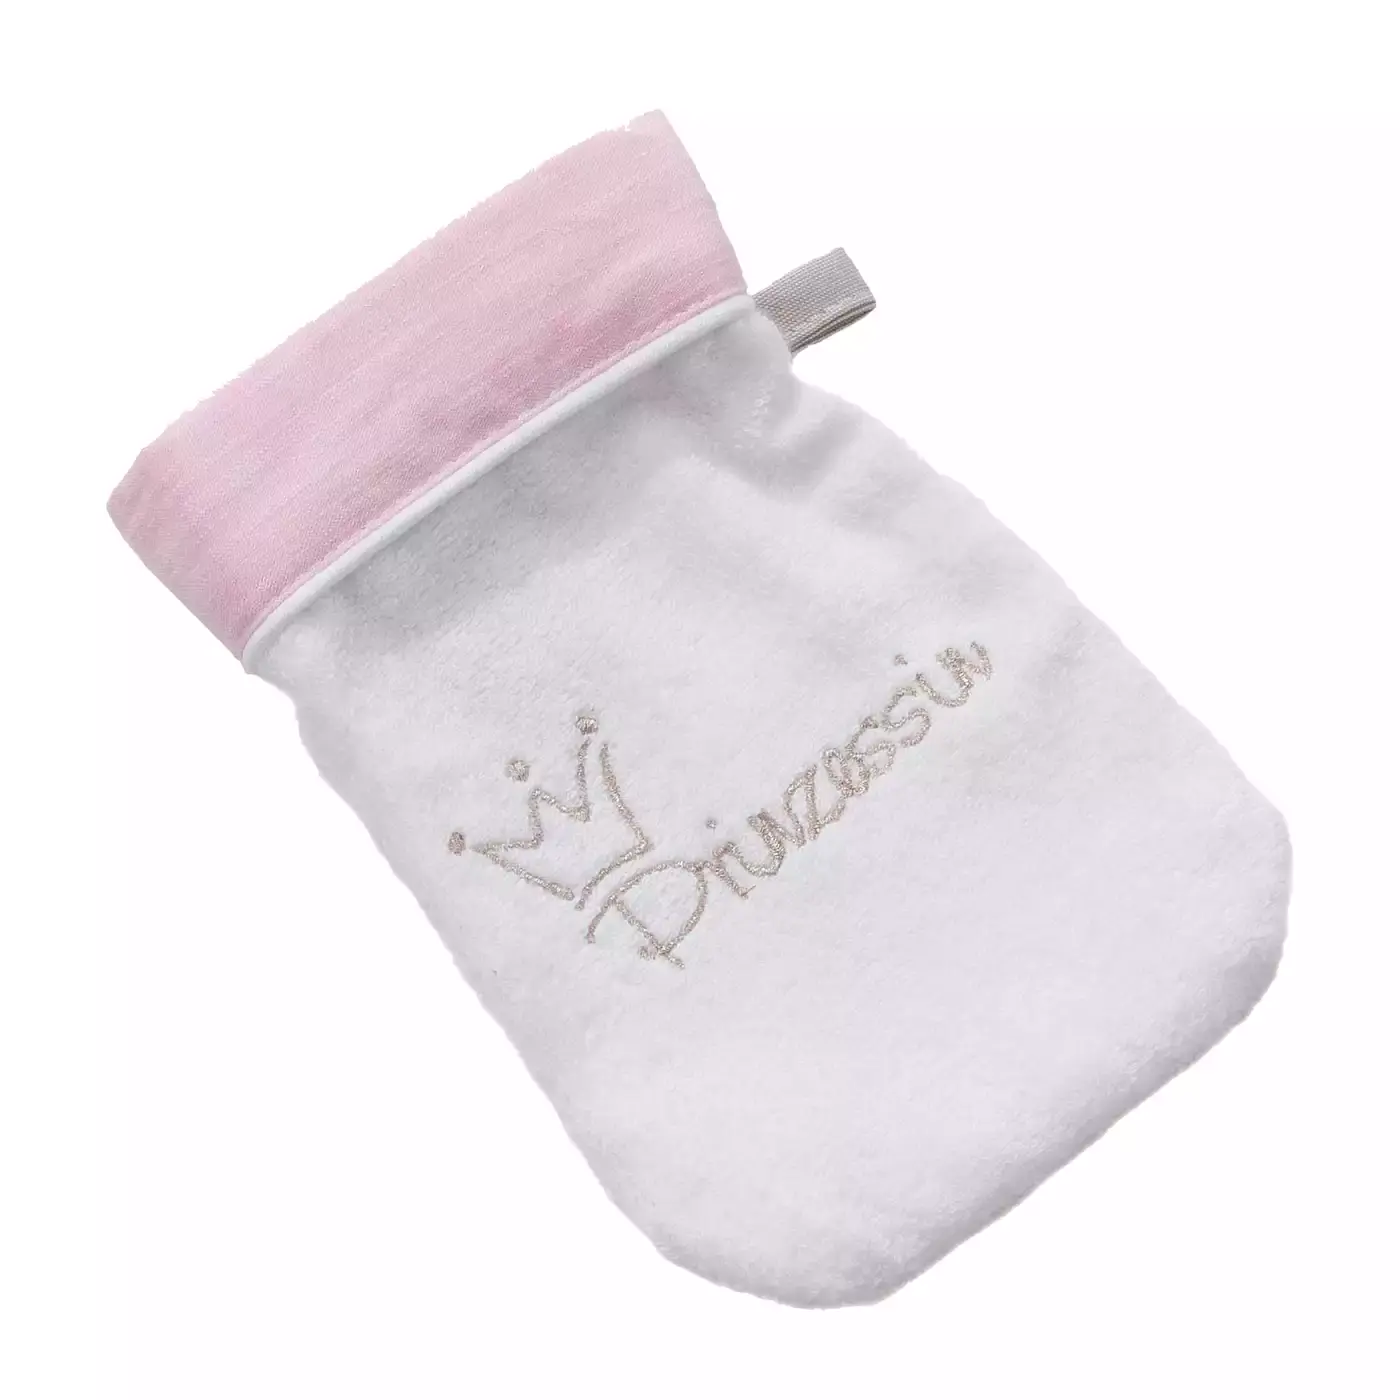 Waschhandschuh Prinzessin BeBes Collection Pink Rosa 2000564724105 1